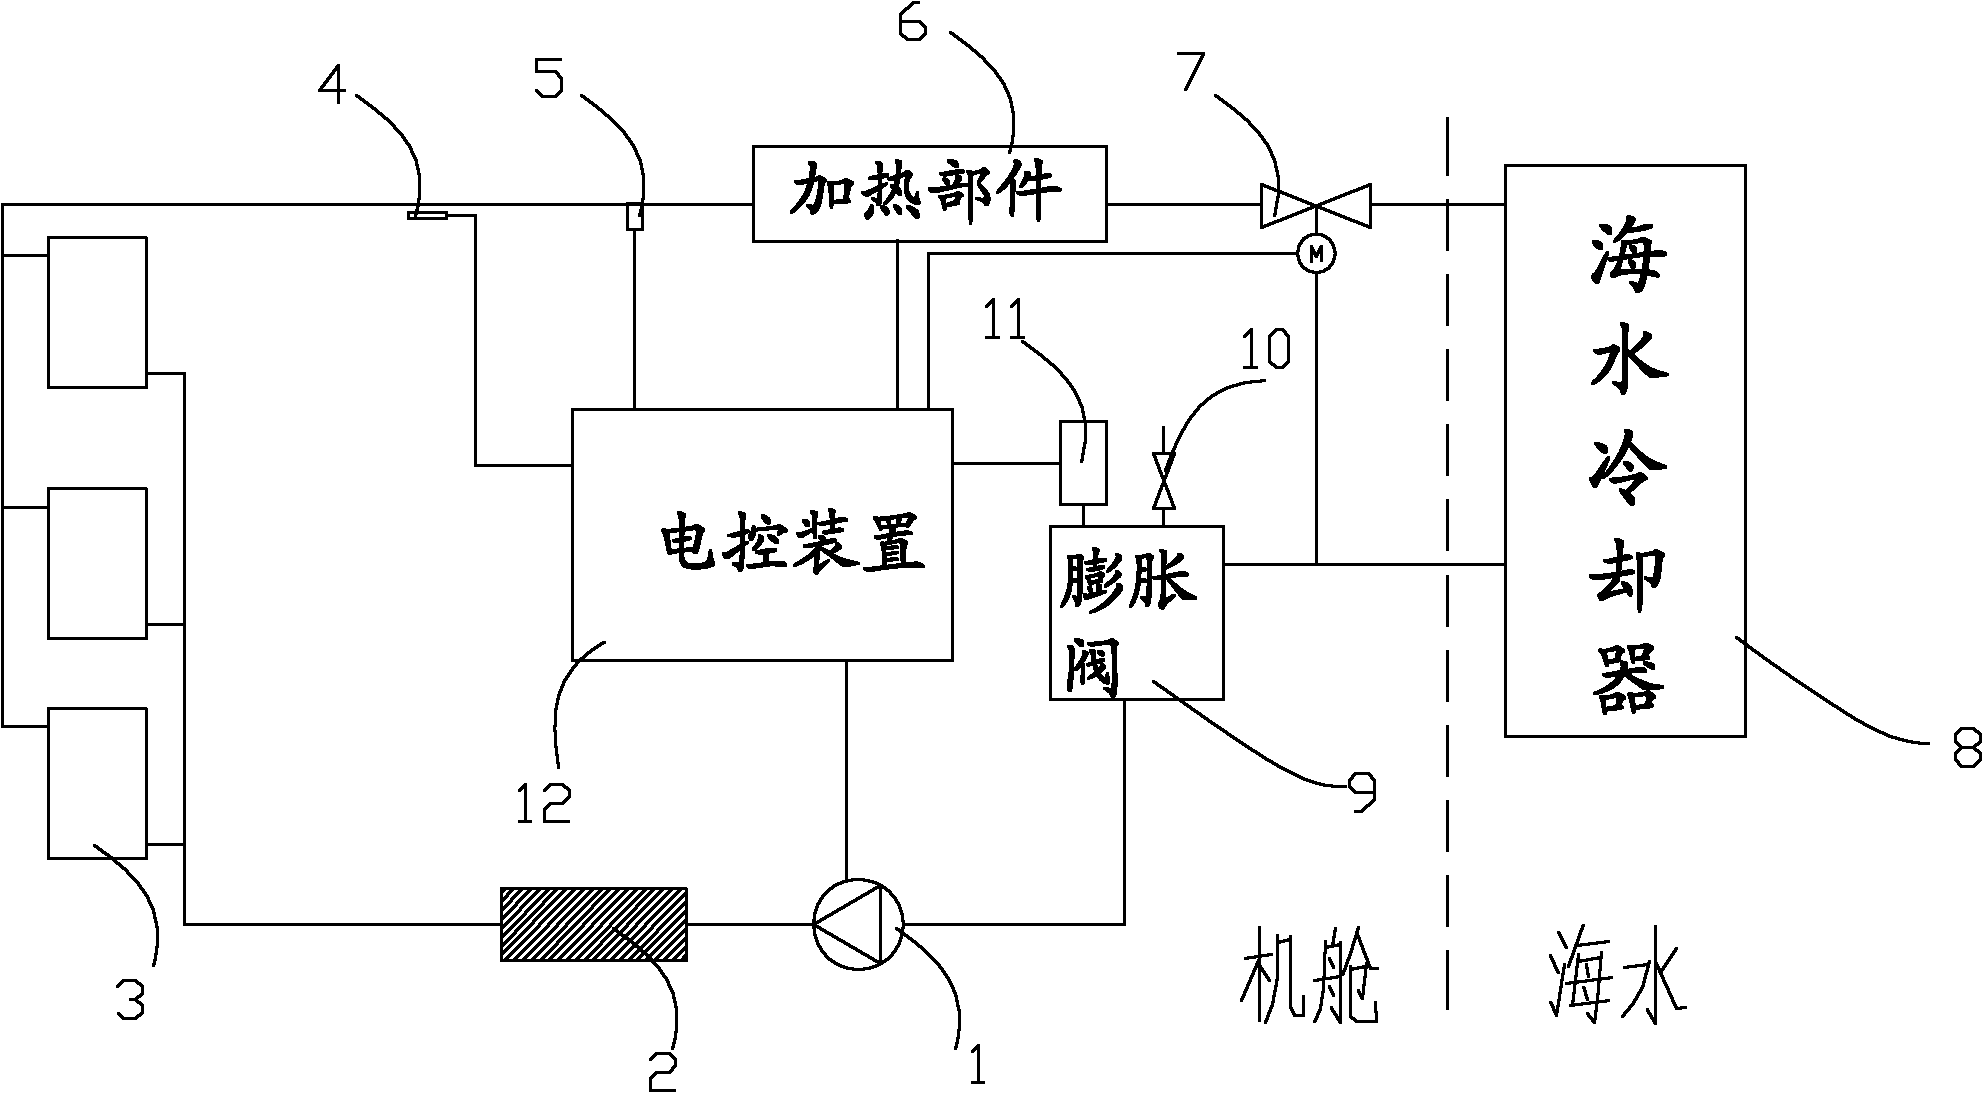 Cooling system for offshore wind generating set